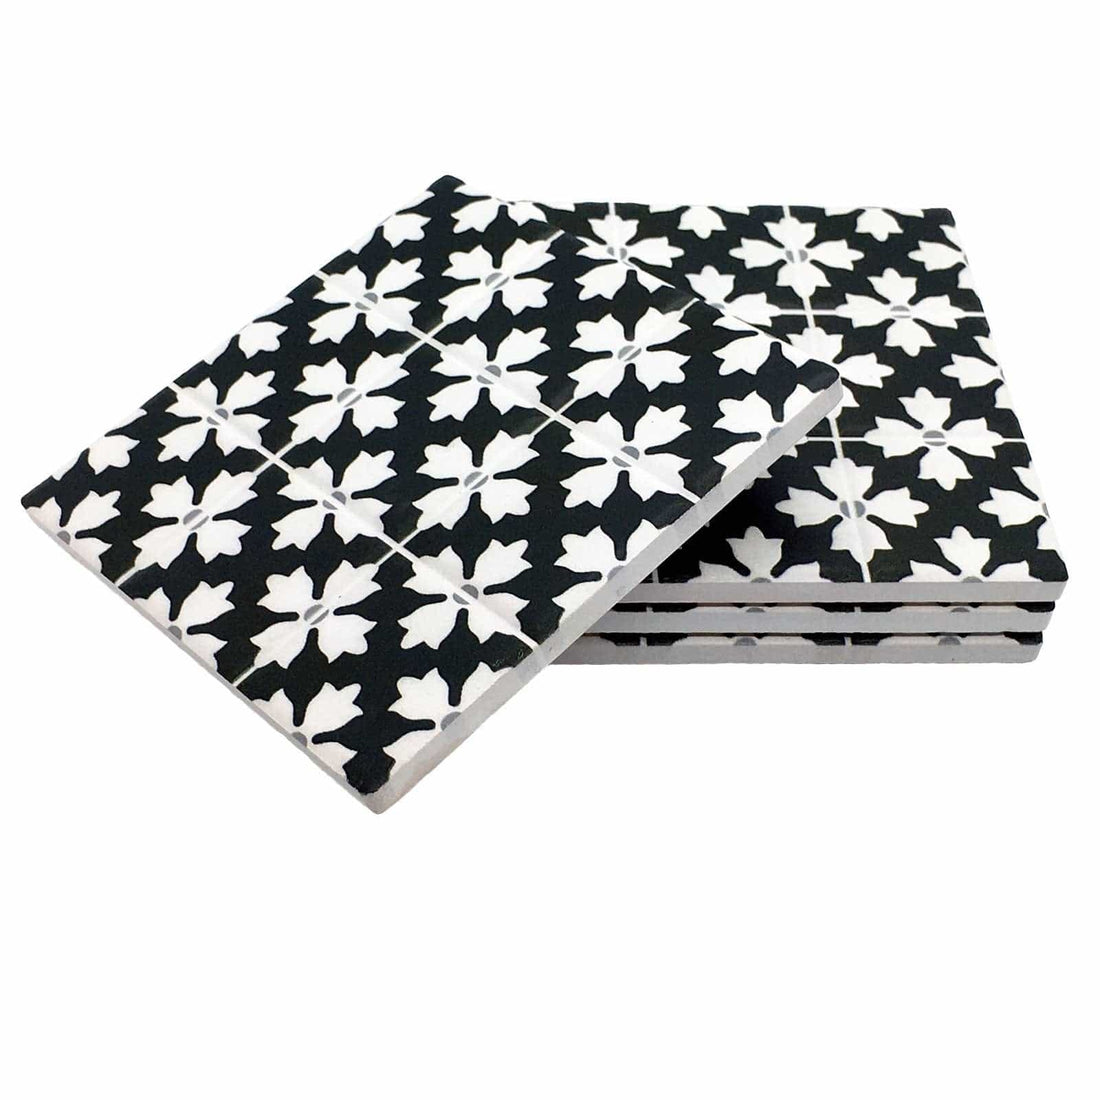 Black and White Moroccan Tile Coasters - Set of 4.